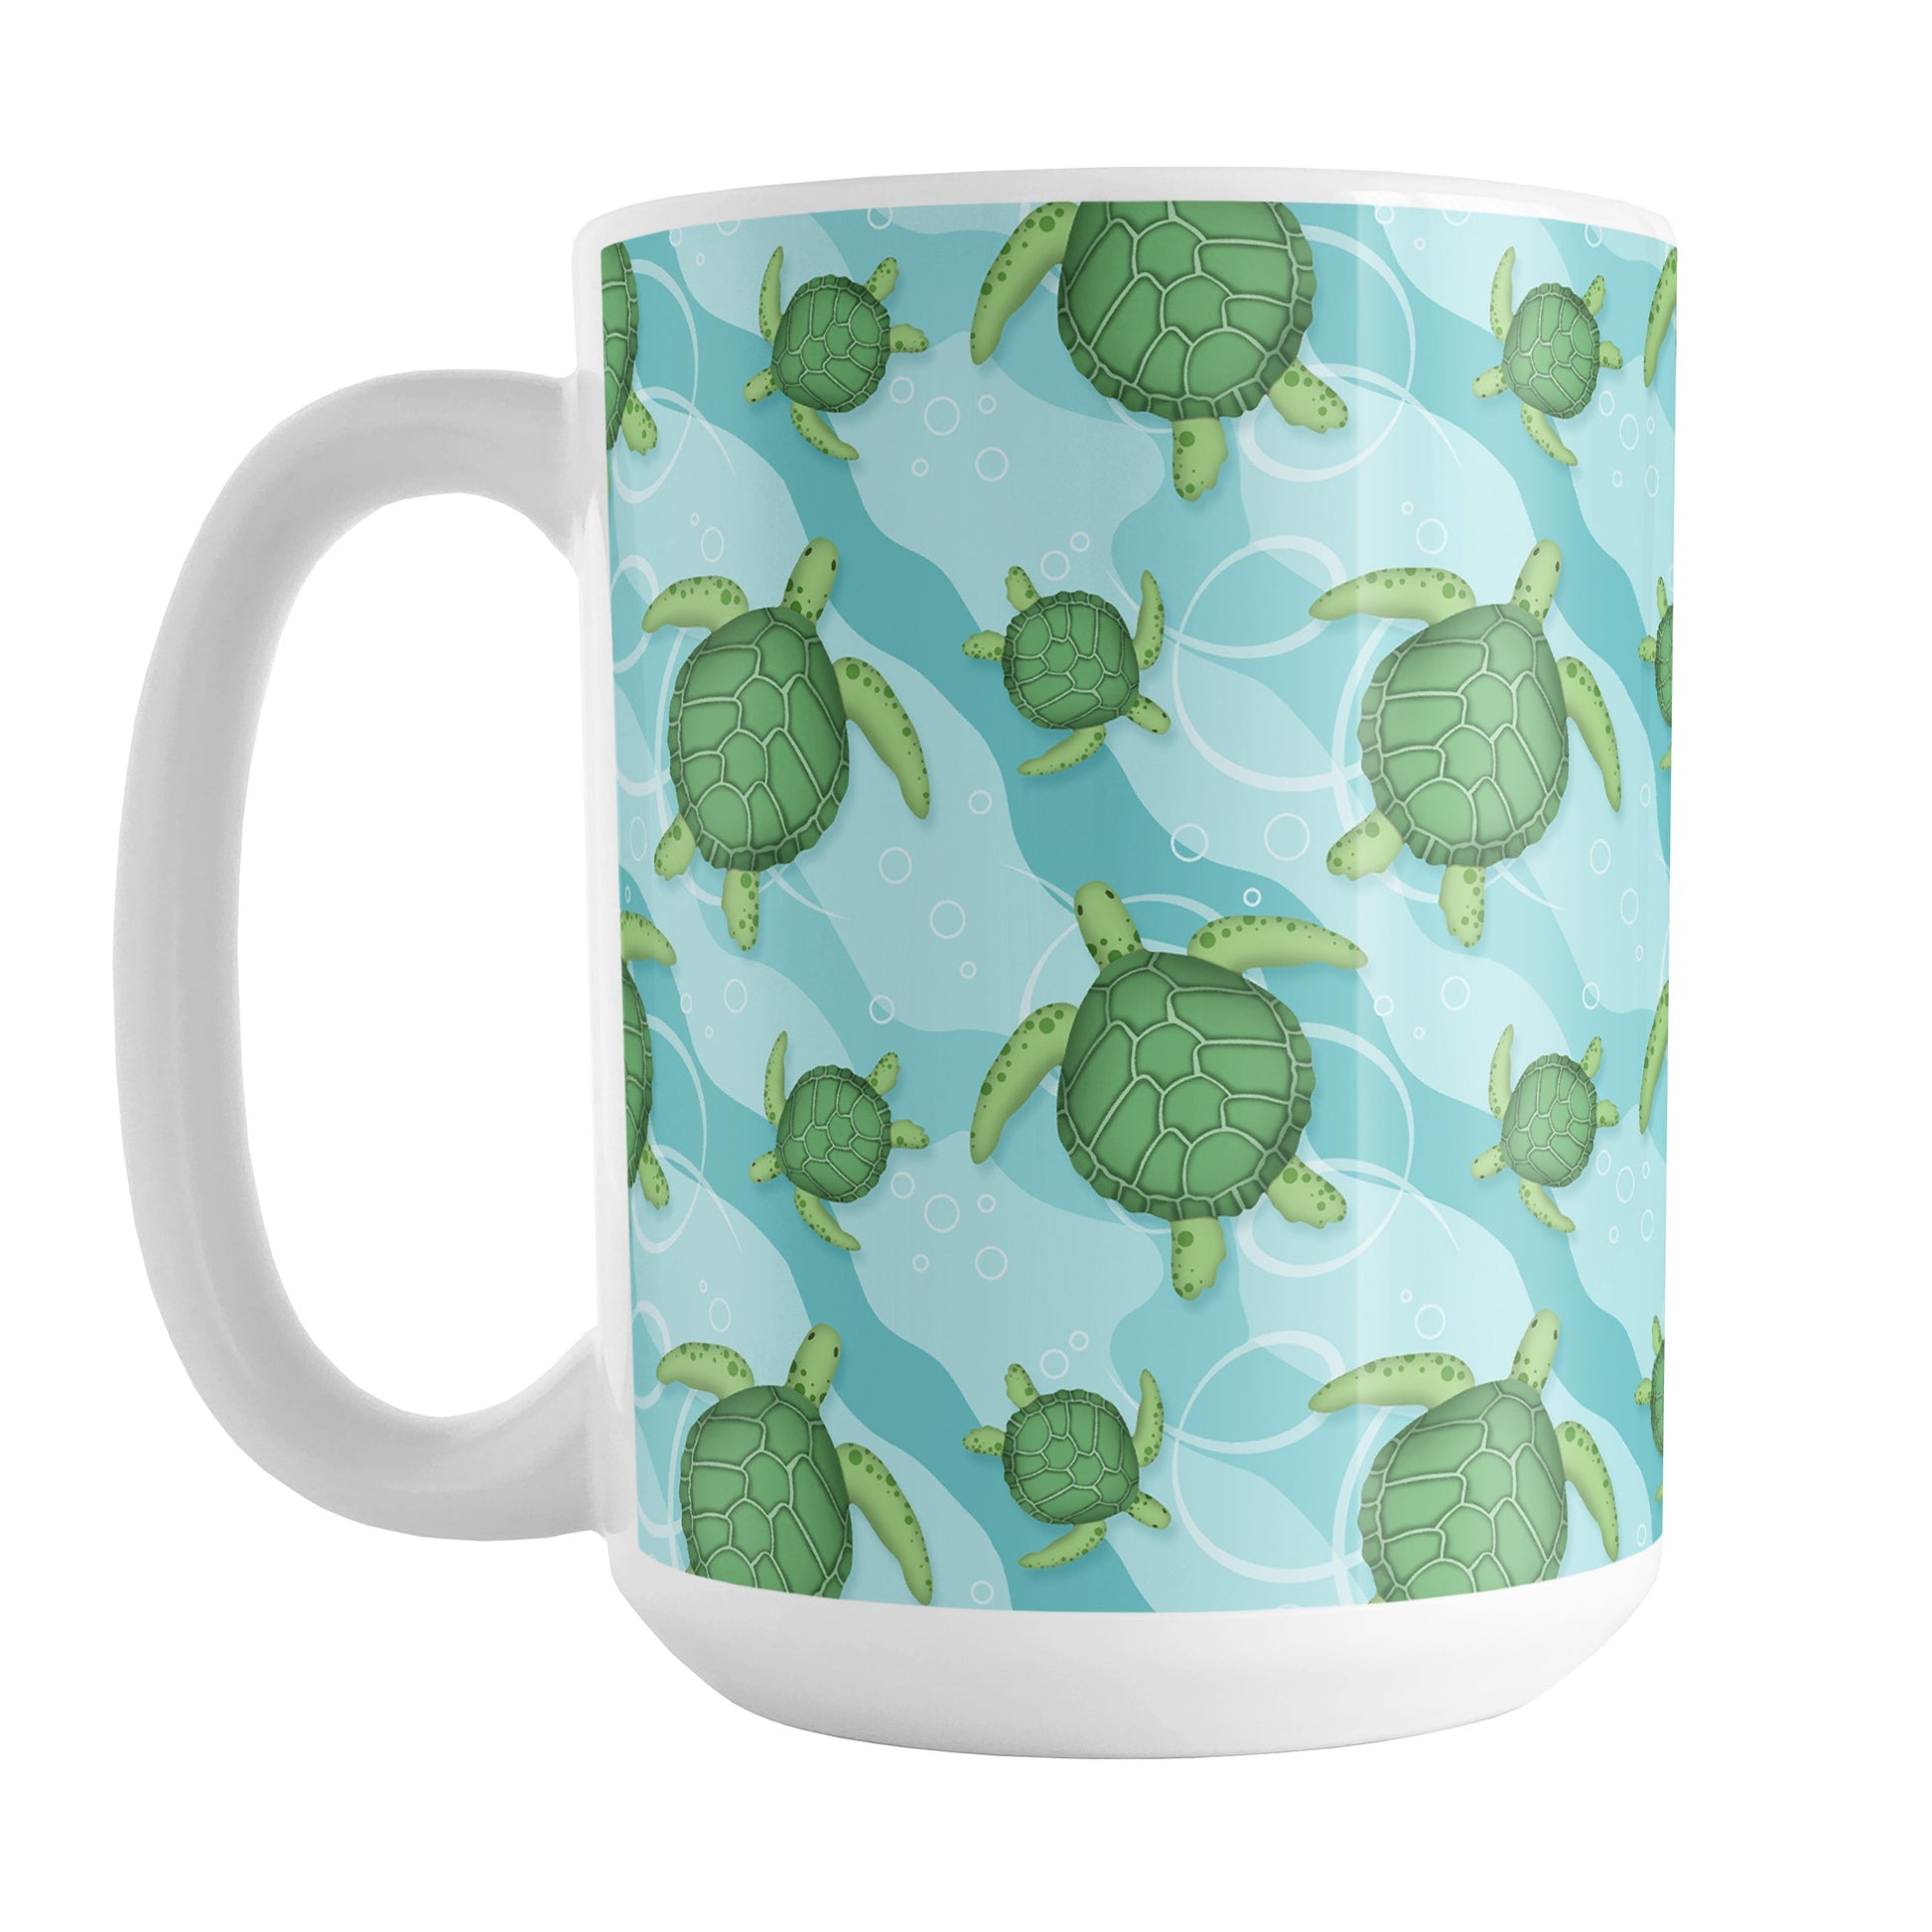 Aquatic Sea Turtle Pattern Mug (15oz) at Amy's Coffee Mugs. A ceramic coffee mug with an aquatic pattern of green sea turtles, swimming over a wavy underwater pattern design in blue and turquoise, that wraps around the mug to the handle.